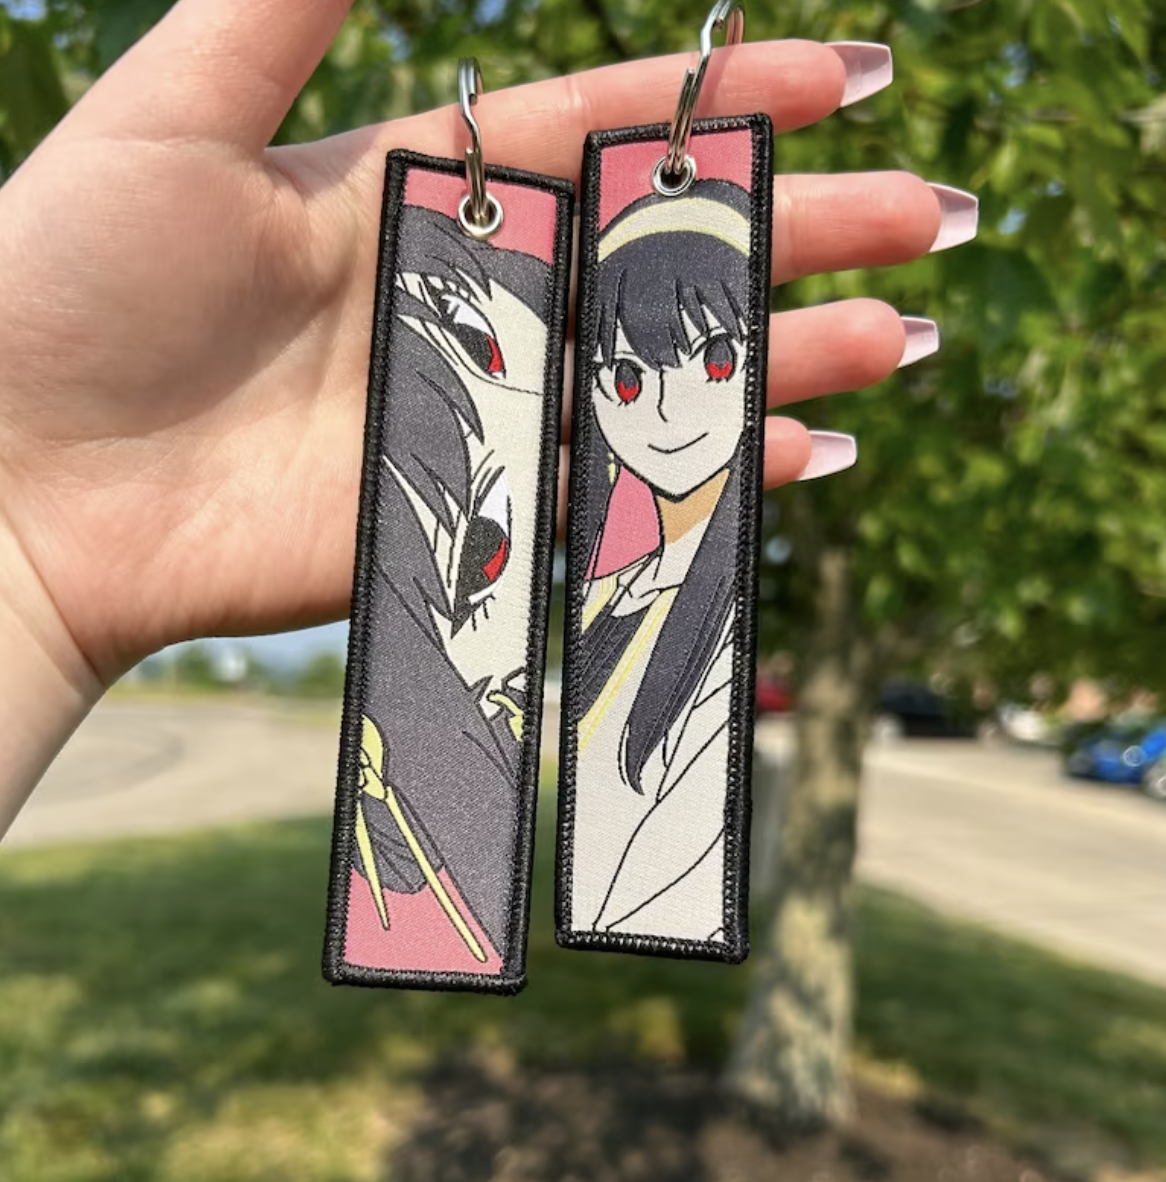 Person holding two anime character keychains outdoors